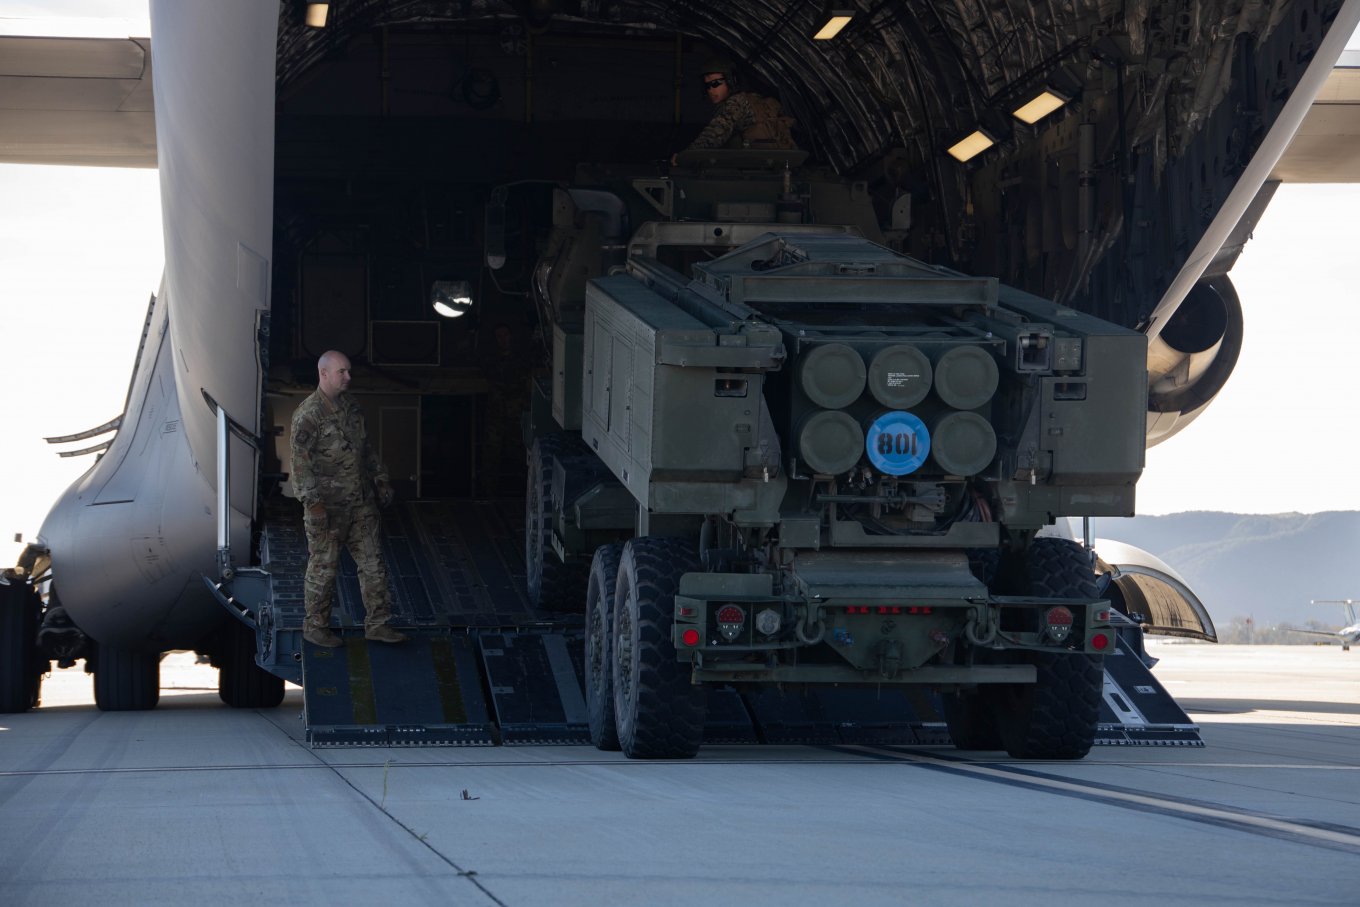 HIMARS is offloaded from a cargo aircraft in the United States